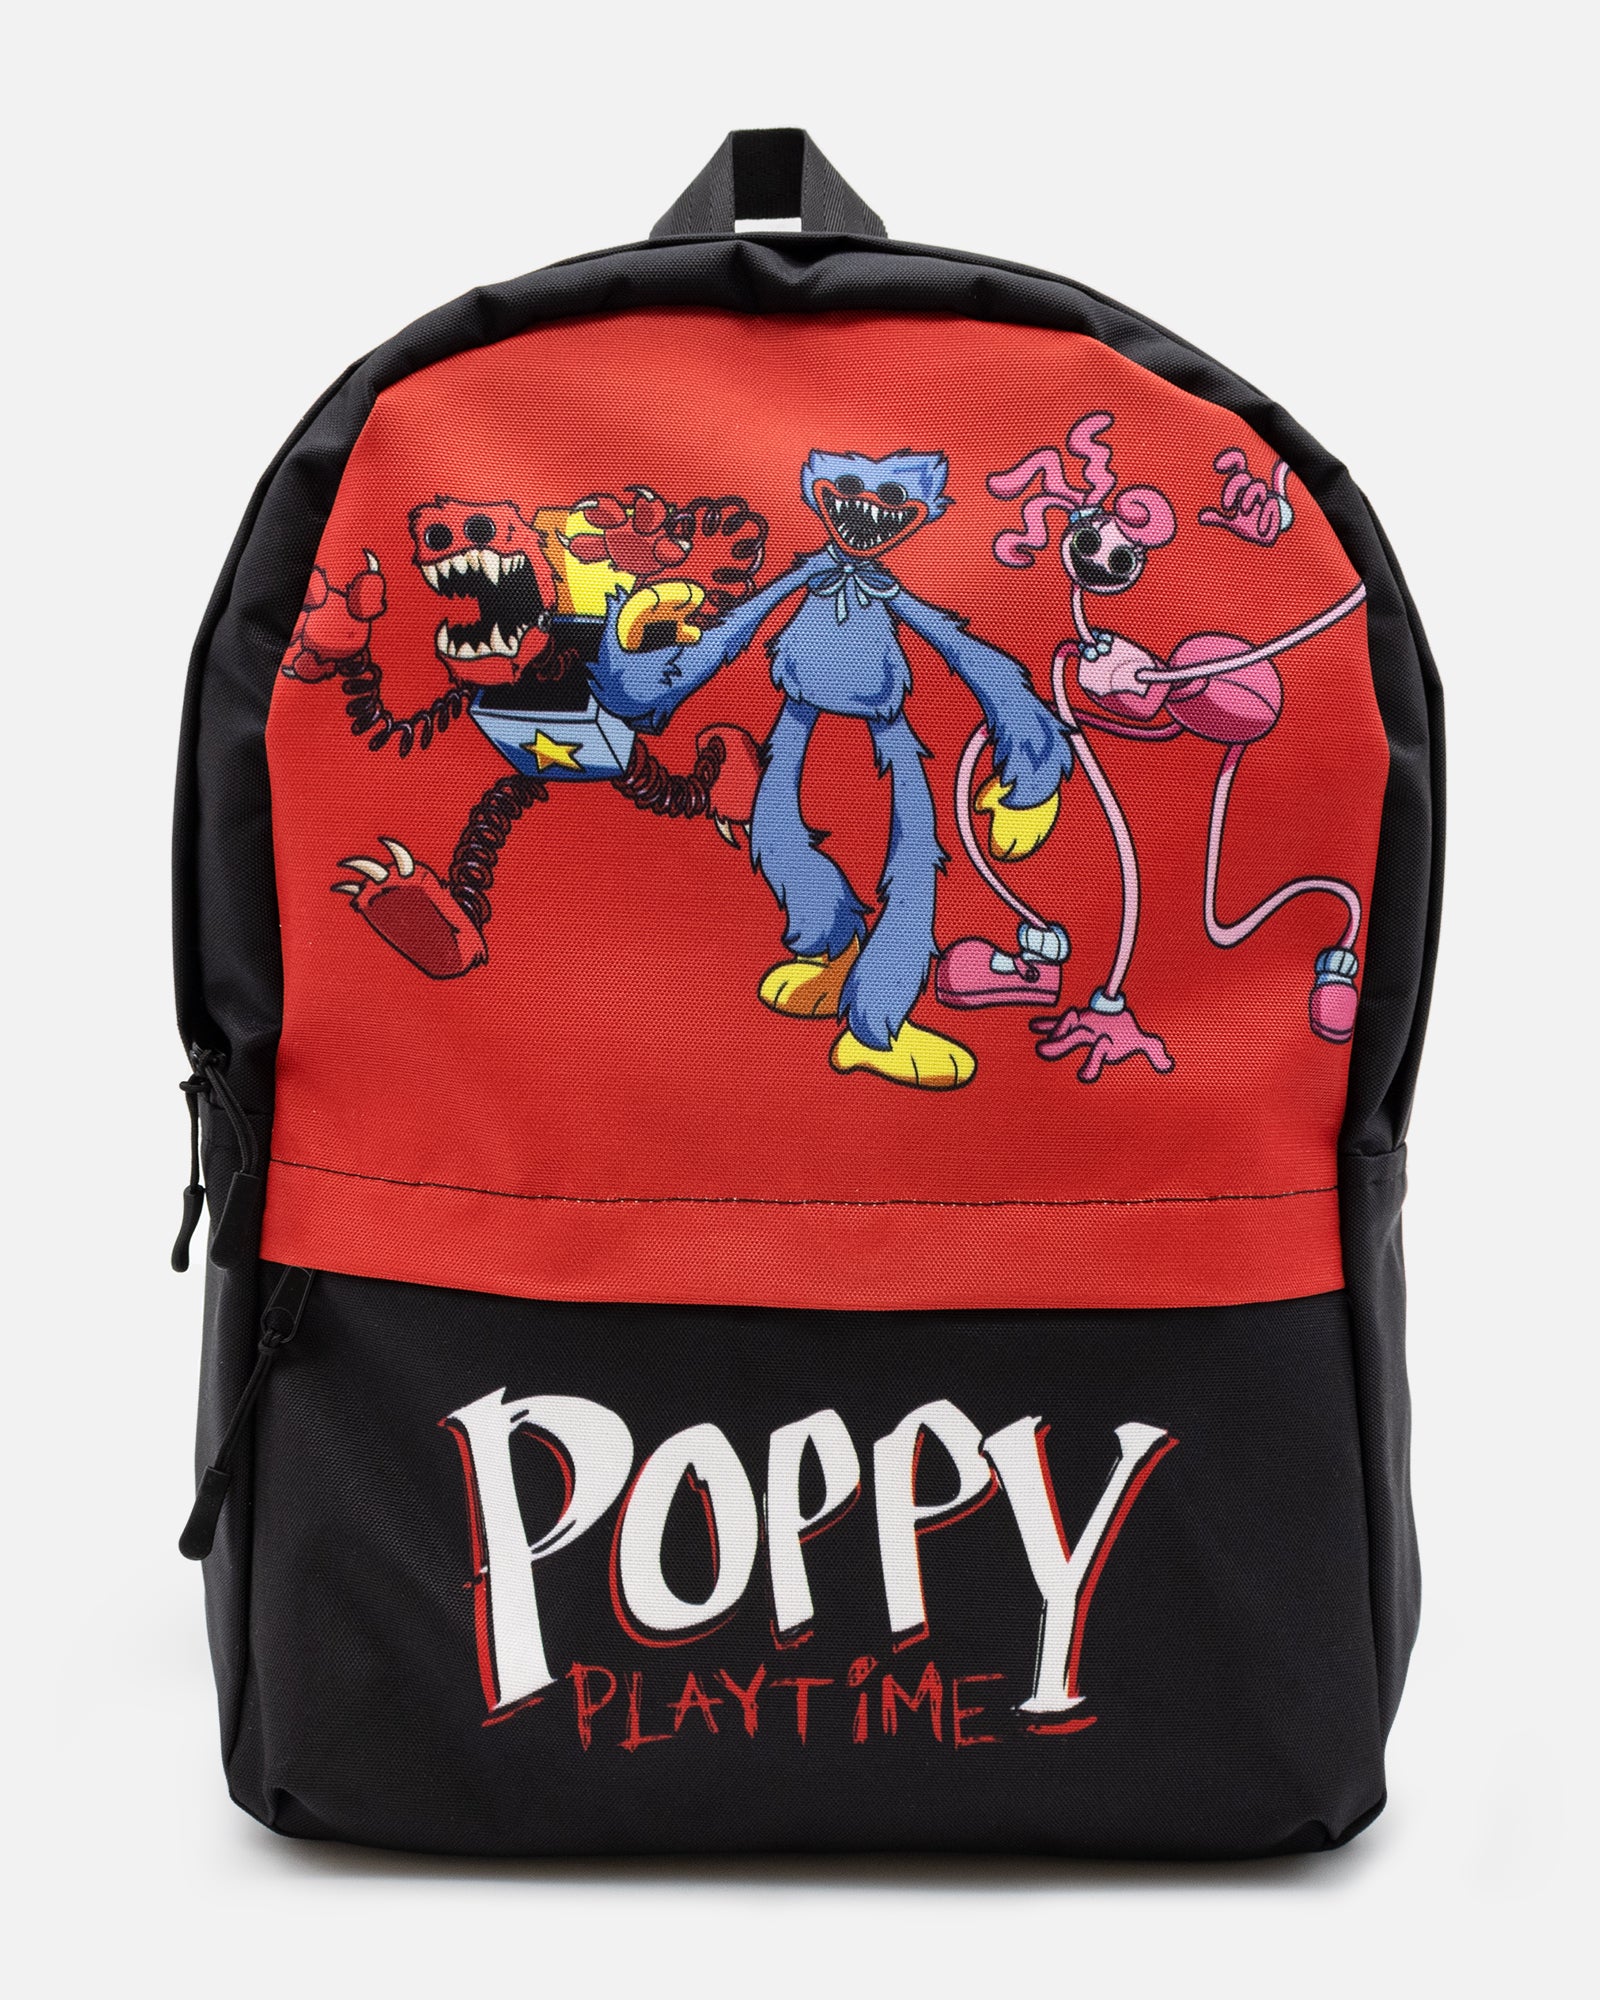 Mommy long legs Spider/Poppy Playtime - Backpack sold by Dusting Friendly, SKU 12765793